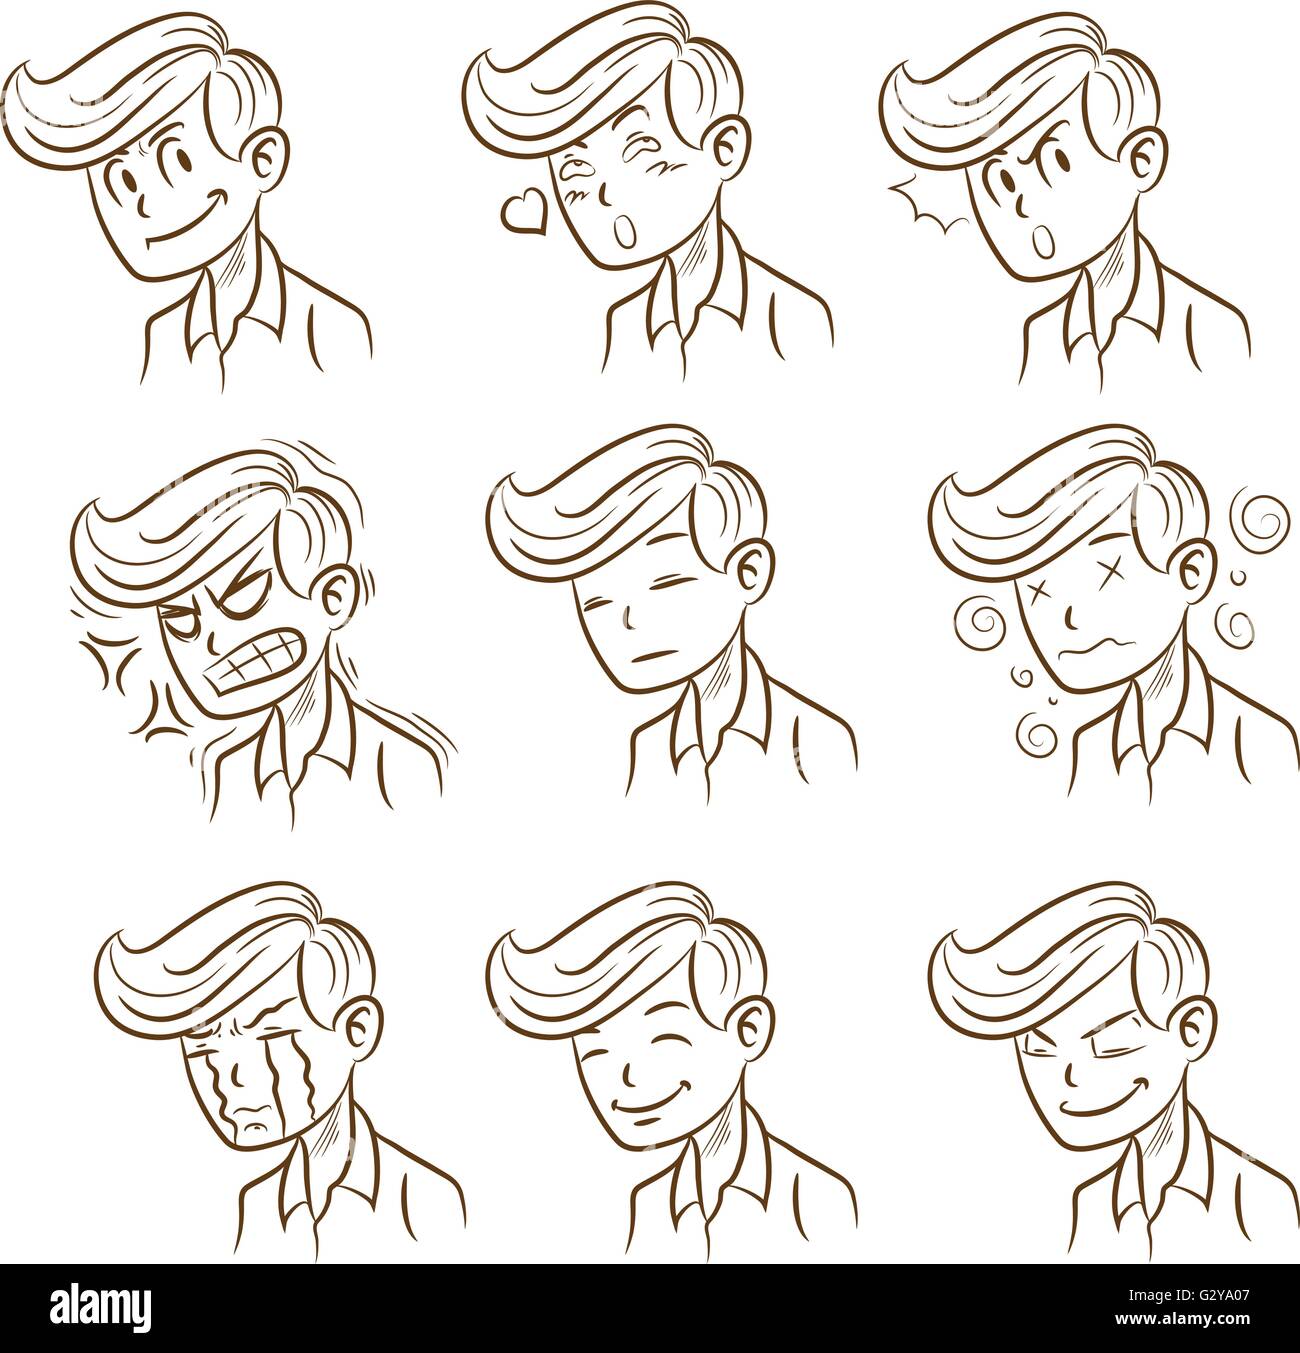 Man expression Stock Vector